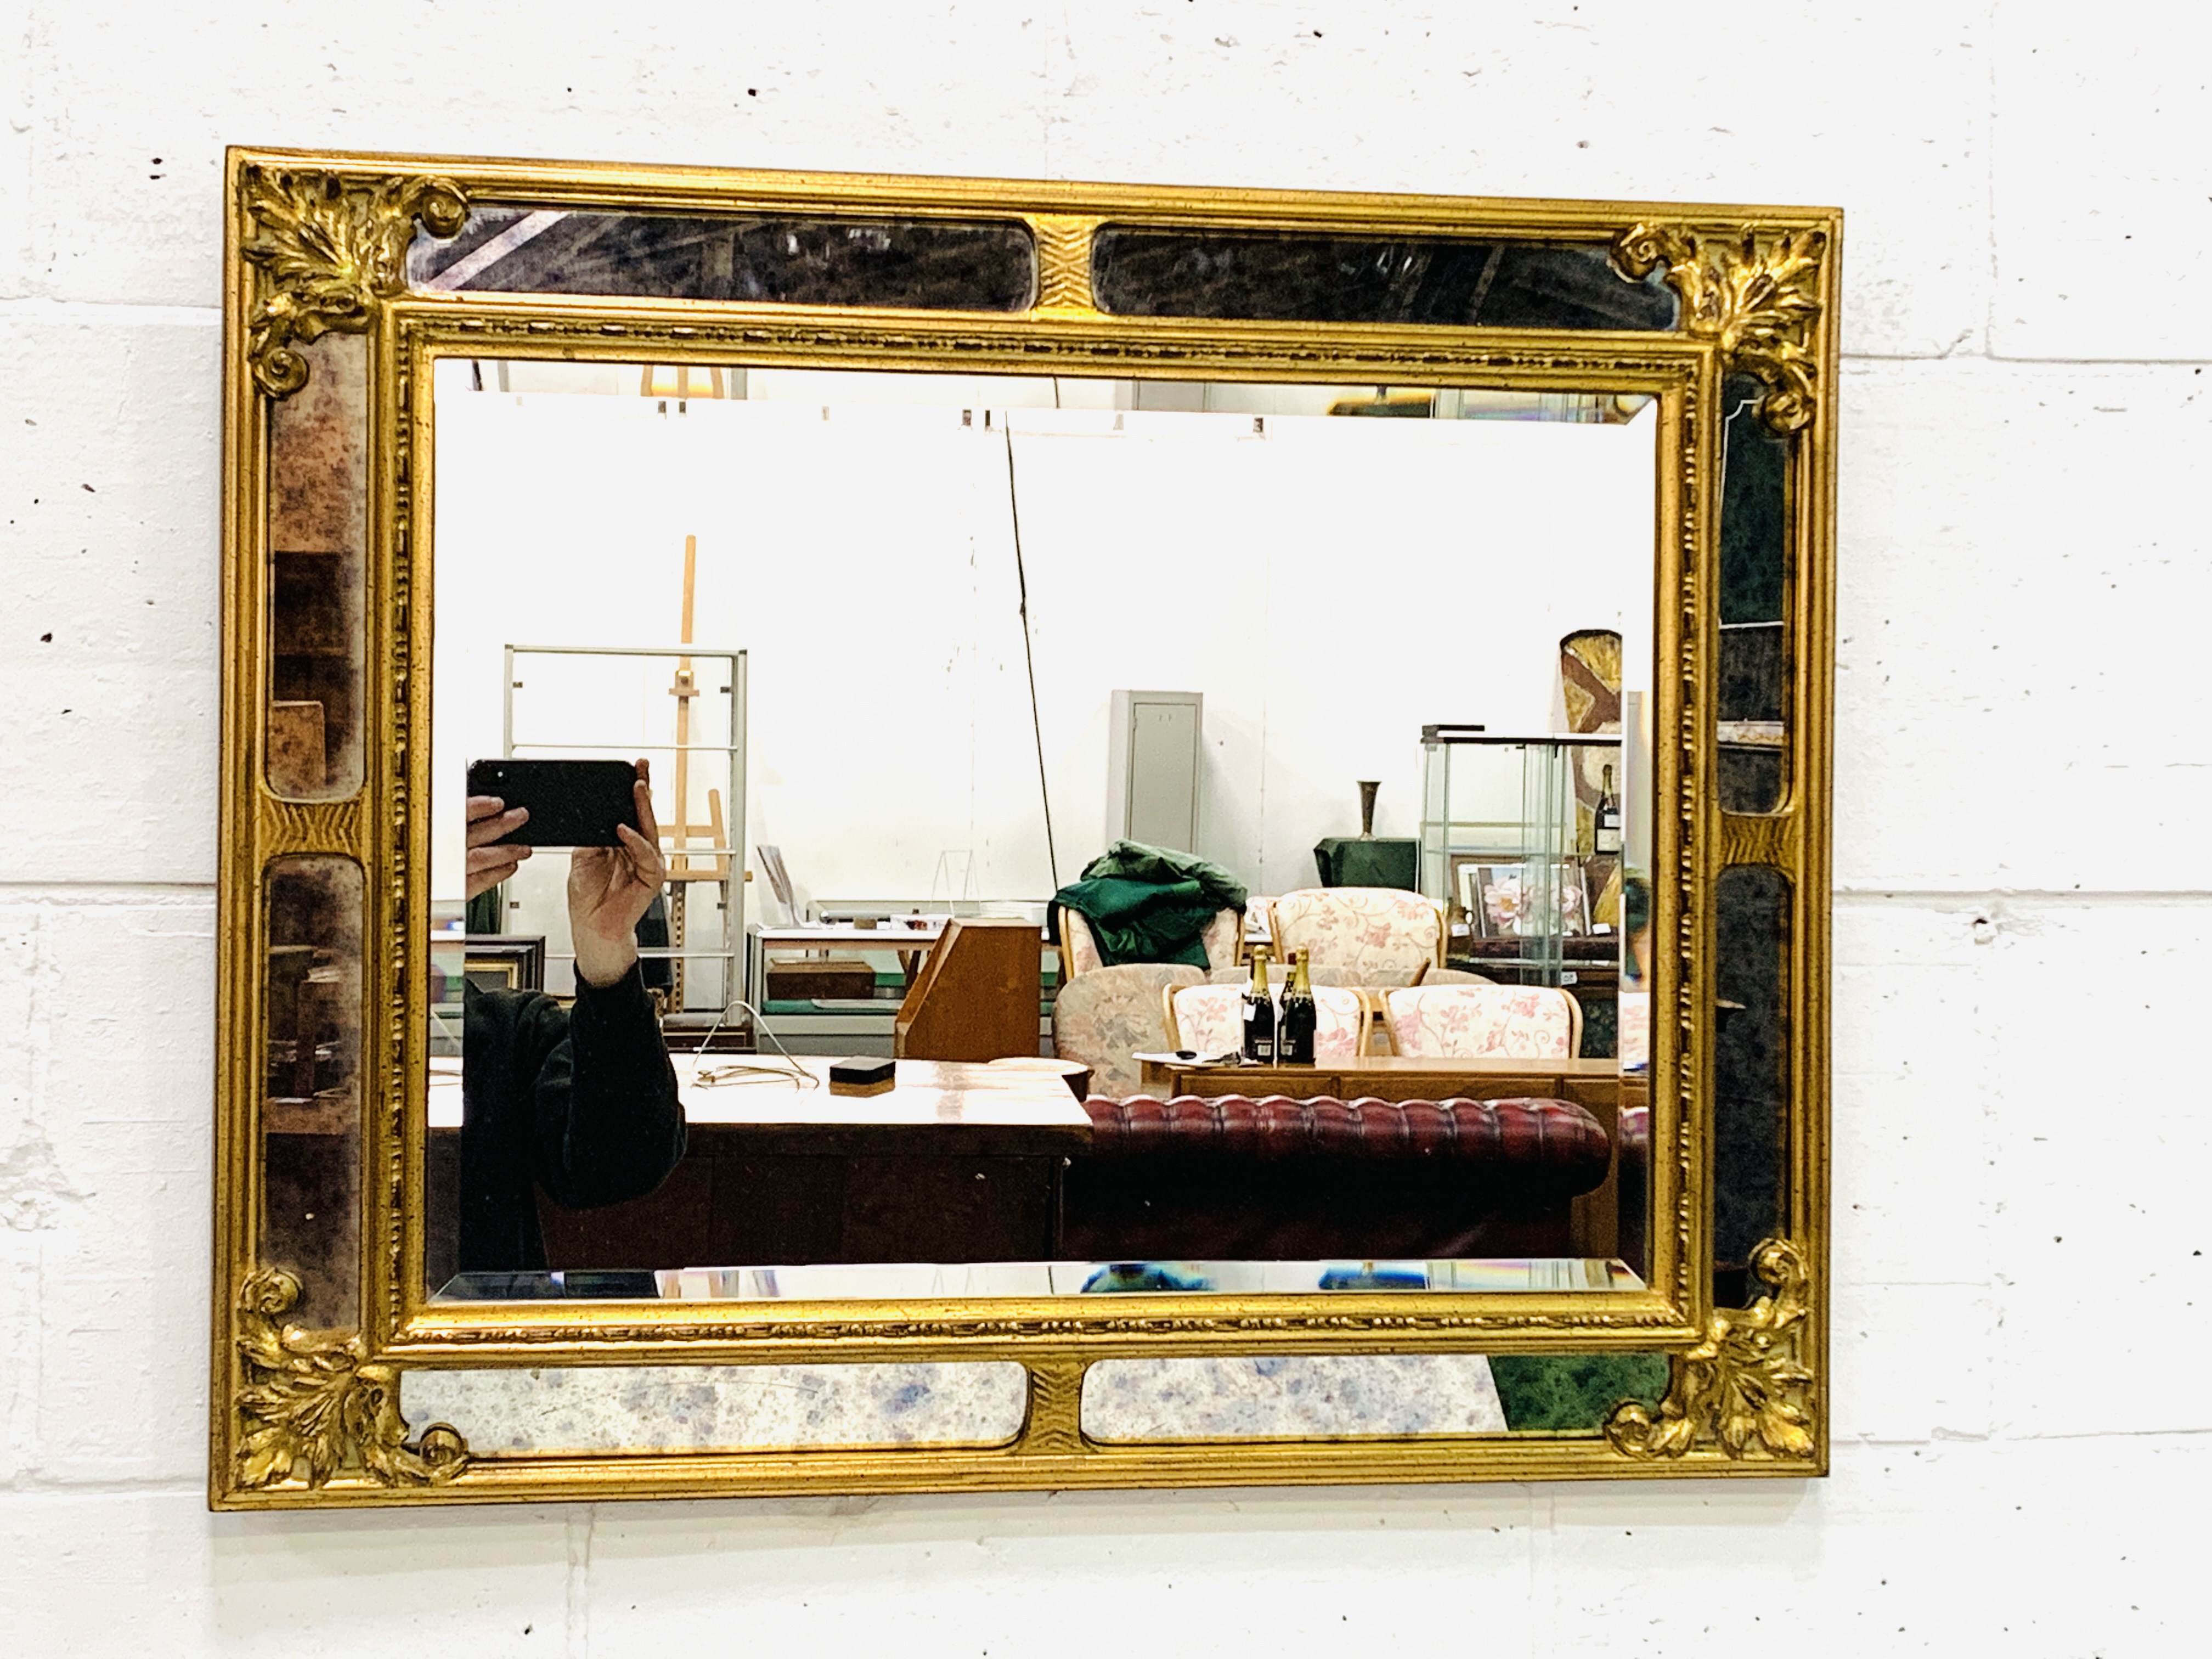 Gilt and mirror framed bevelled edge wall mirror